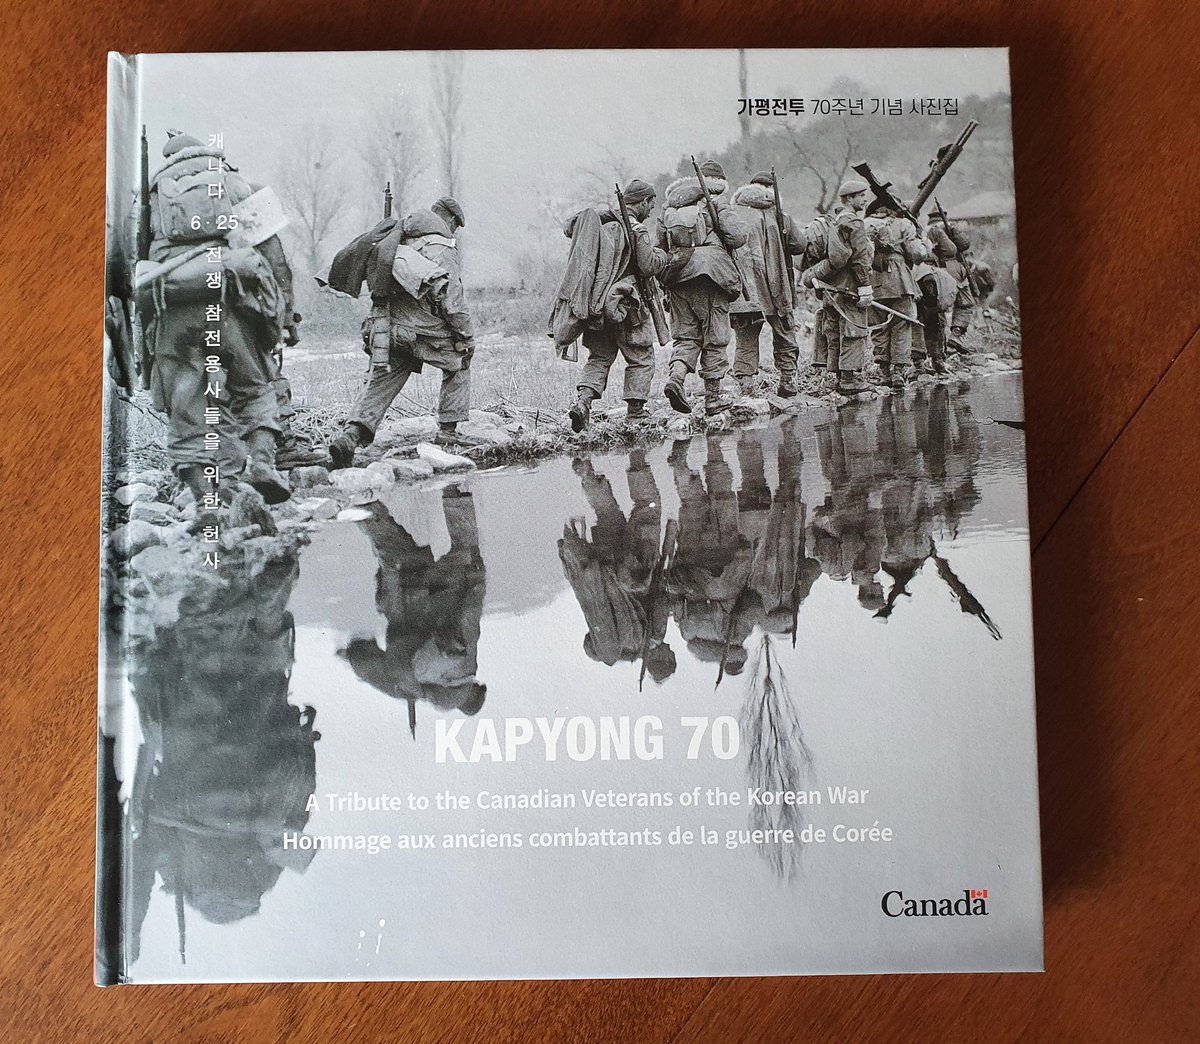 A great thread by @CAFinUS about Tommy Prince and residential schools in Canada. We must all take time to read, learn and act. @CanEmbKorea also paid tribute to Tommy Prince in our special book on the occasion of the 70th anniversary of the #BattleOfKapyong